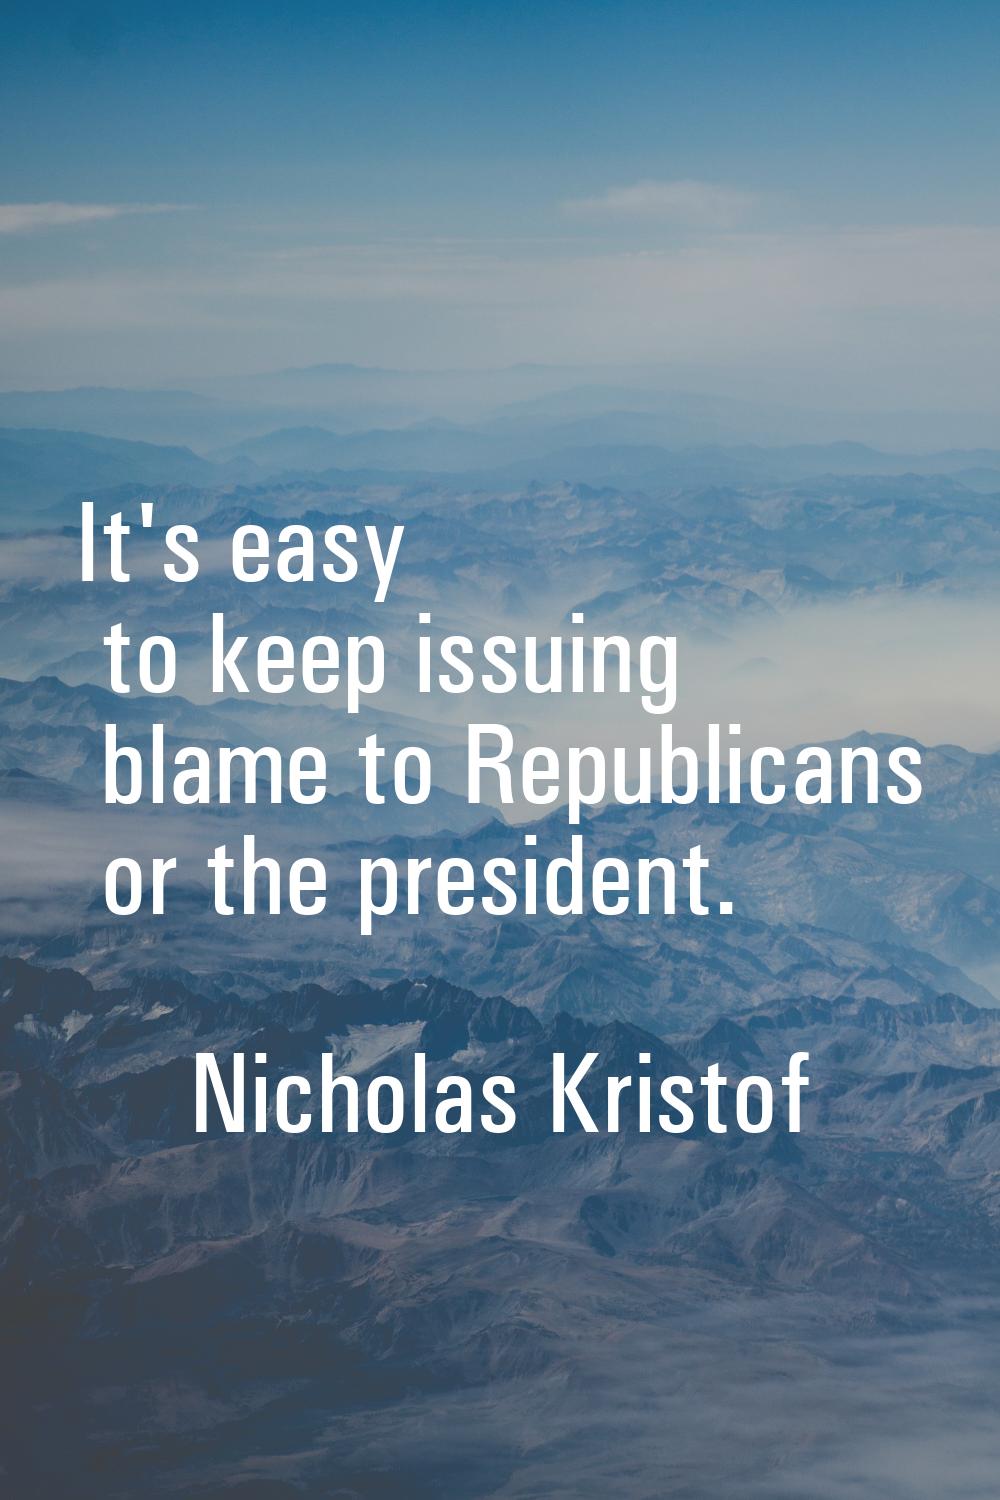 It's easy to keep issuing blame to Republicans or the president.